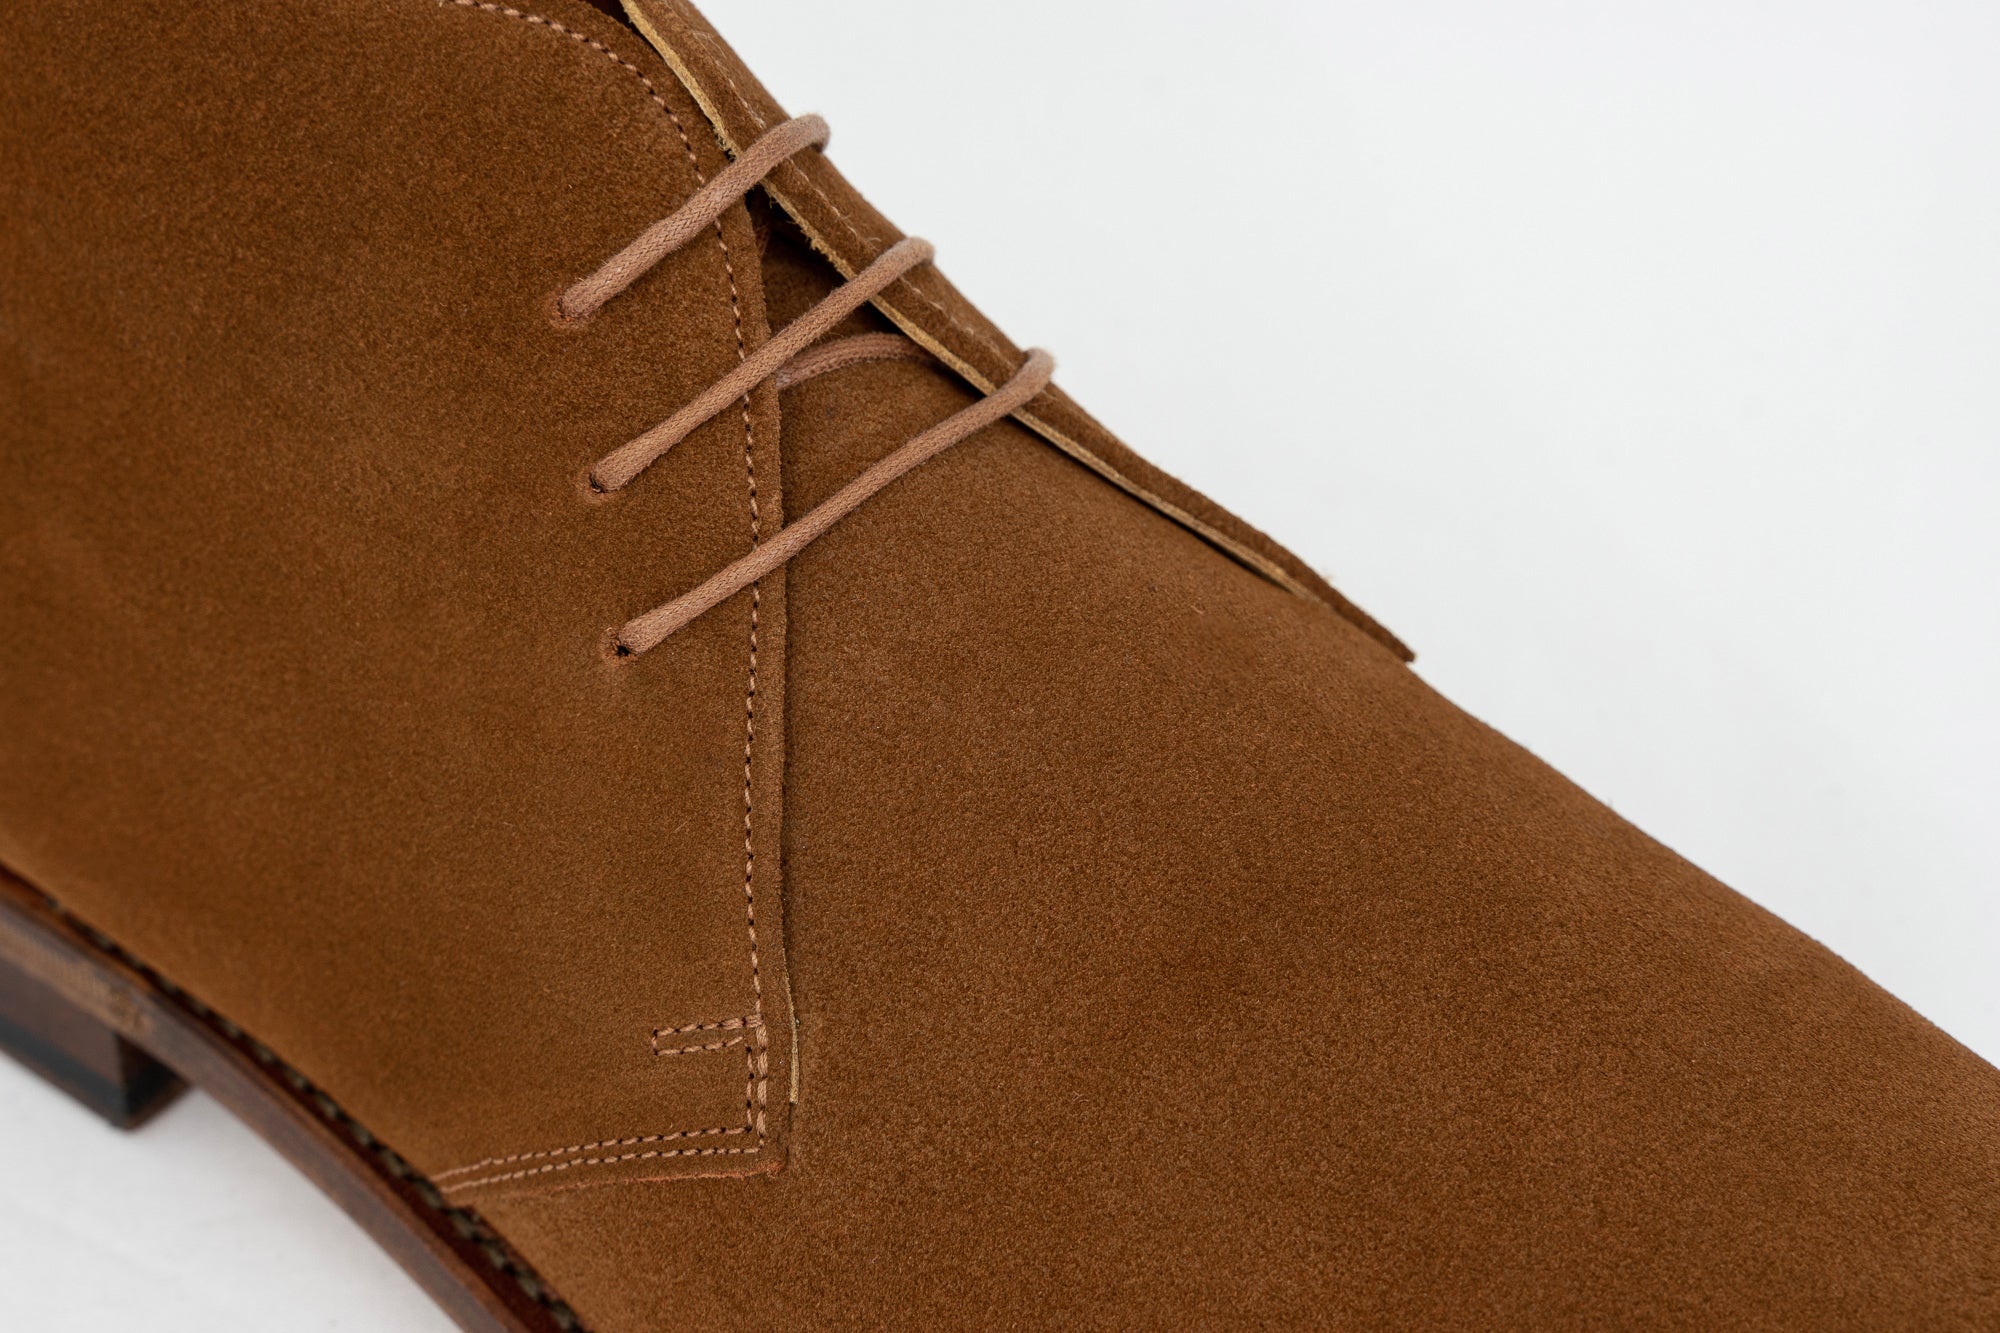 ypsons chukka boots homme veau velours caramel vue zoom